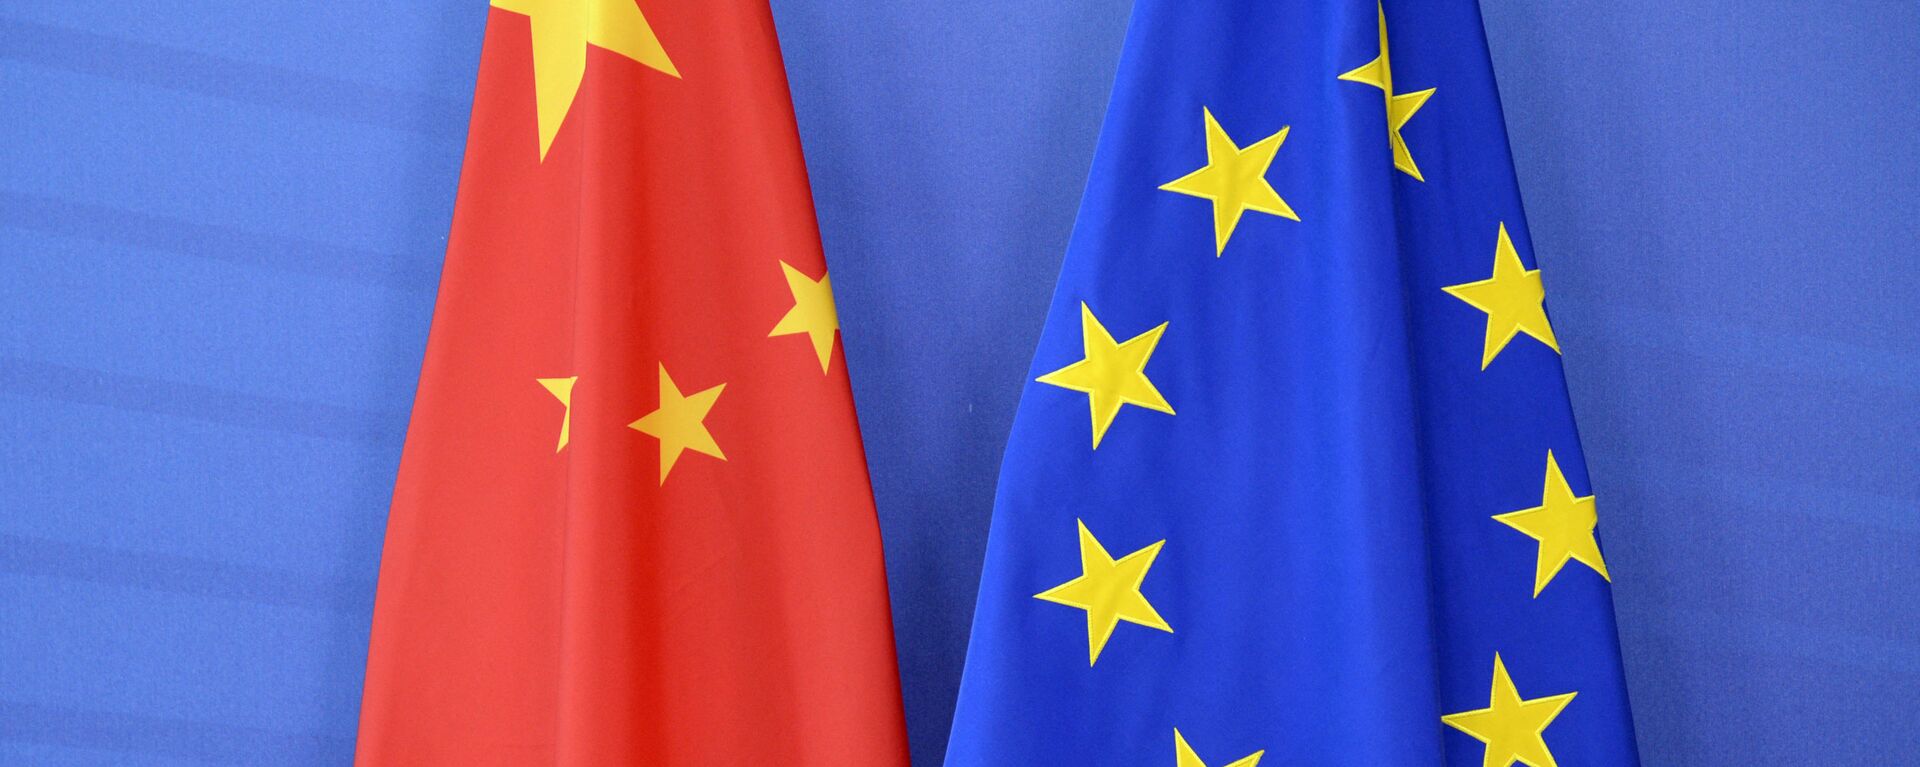 The Chinese flag(L) is draped beside the European Union (EU) during an EU- China Summit at the European Union Commission headquarters in Brussels on June 29, 2015 - Sputnik International, 1920, 11.05.2023